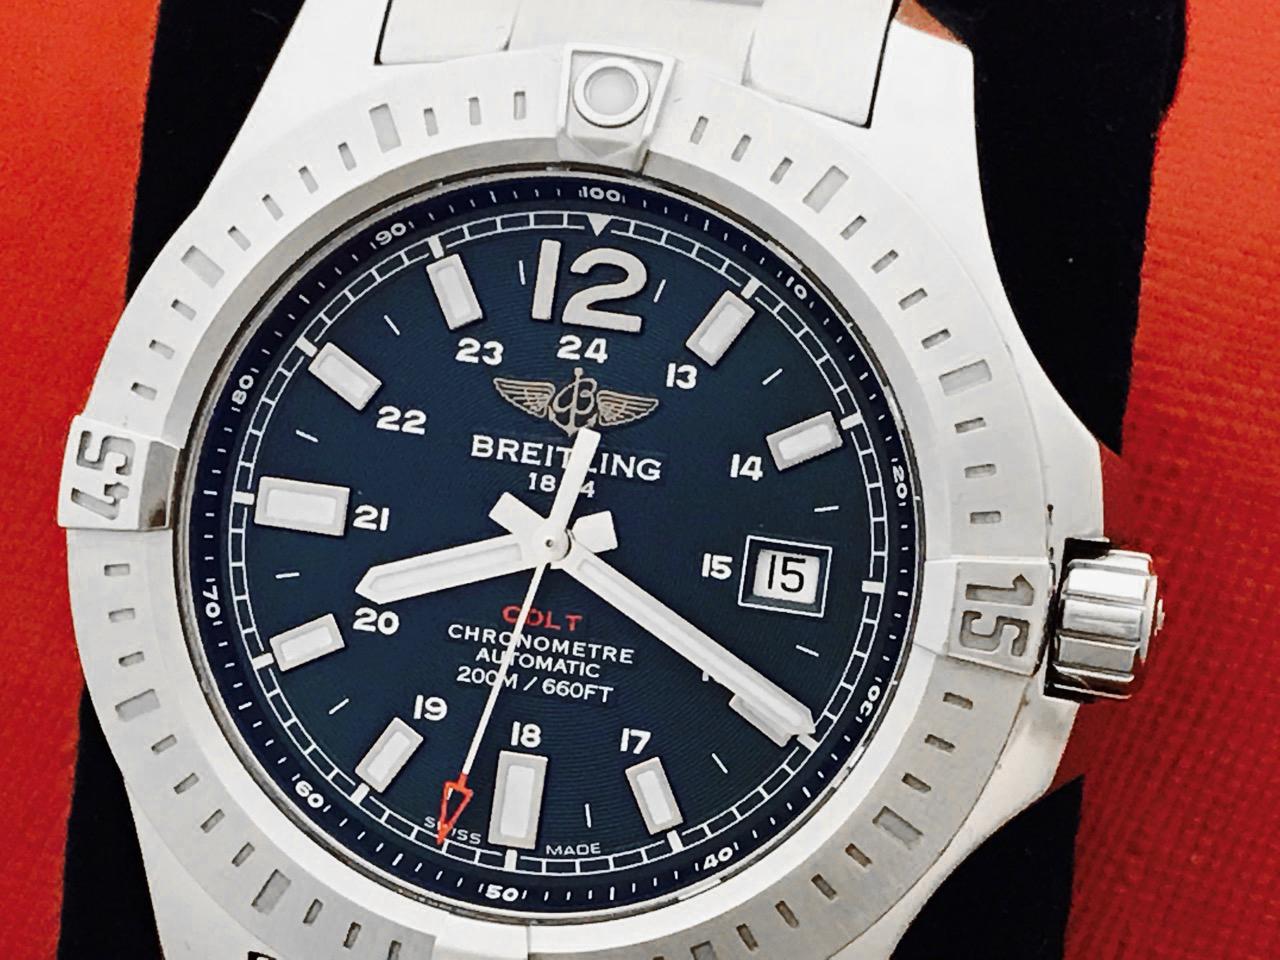 As New Breitling Colt Mens Wristwatch Model A1738811/C906-SS. Slate Blue 24 hour Dial with luminous hour markers. Stainless Steel case (44mm). Water Resistant to 220 Meters - 660 Feet. Stainless Steel Breitling bracelet with flip-lock clasp.